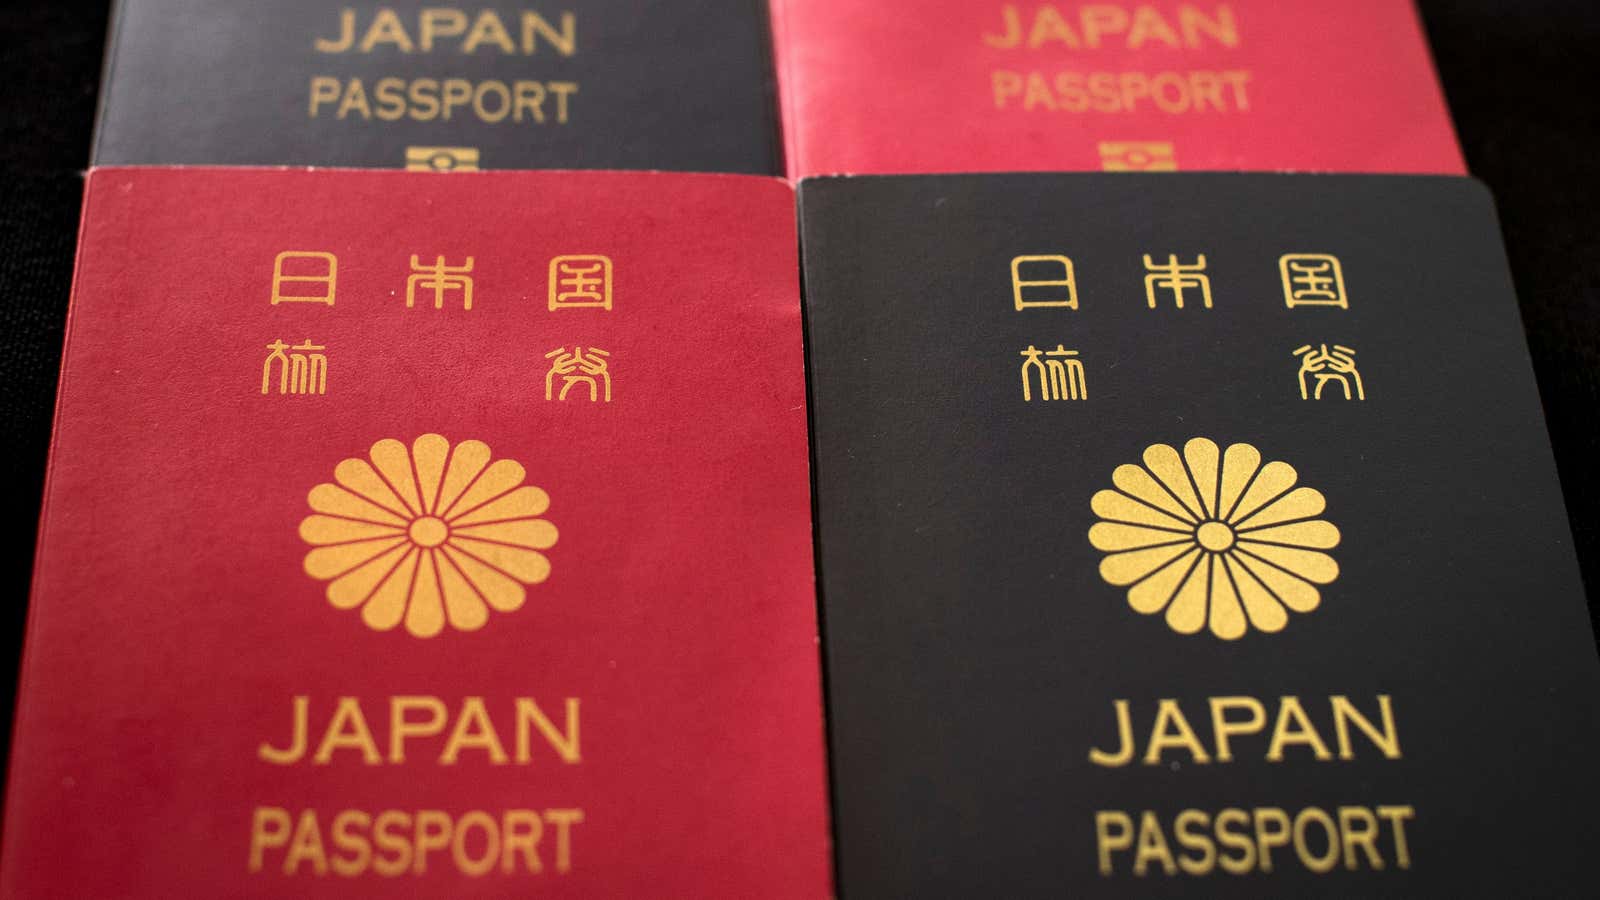 Which passport is the world's most powerful?